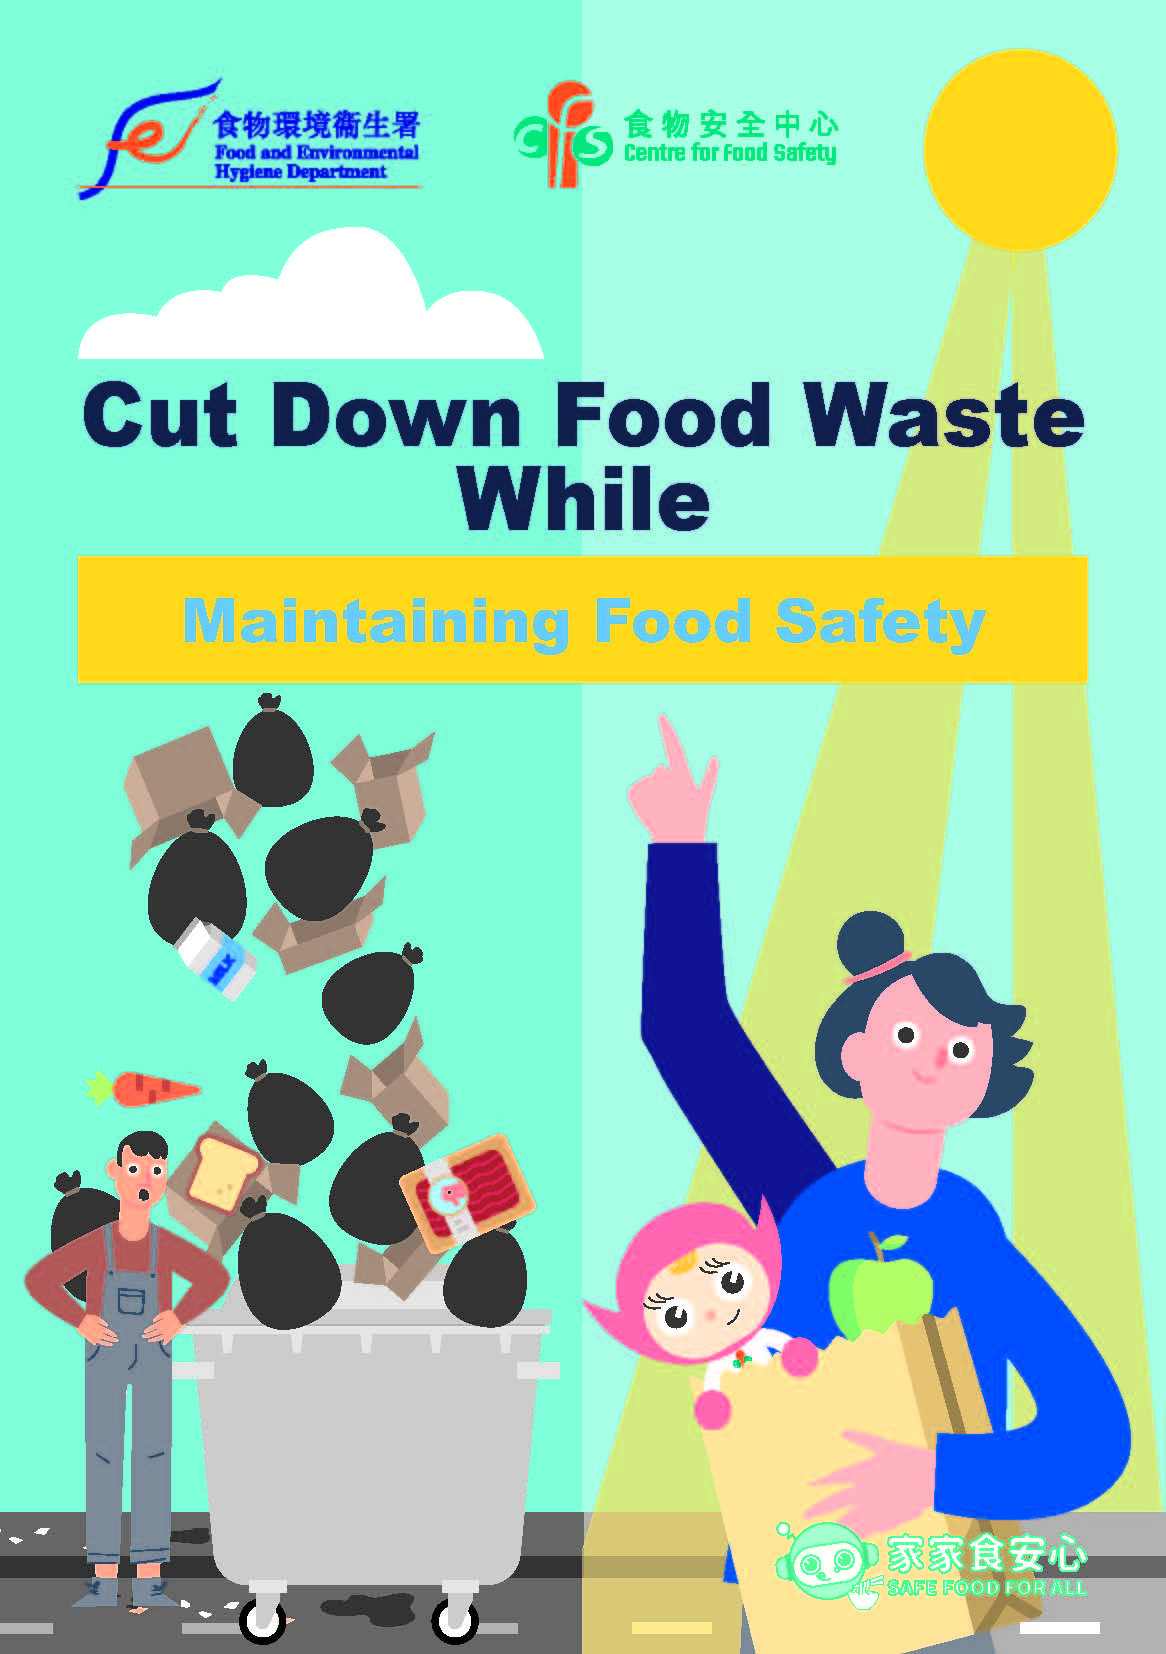 Cut Down Food Waste While Maintaining Food Safety